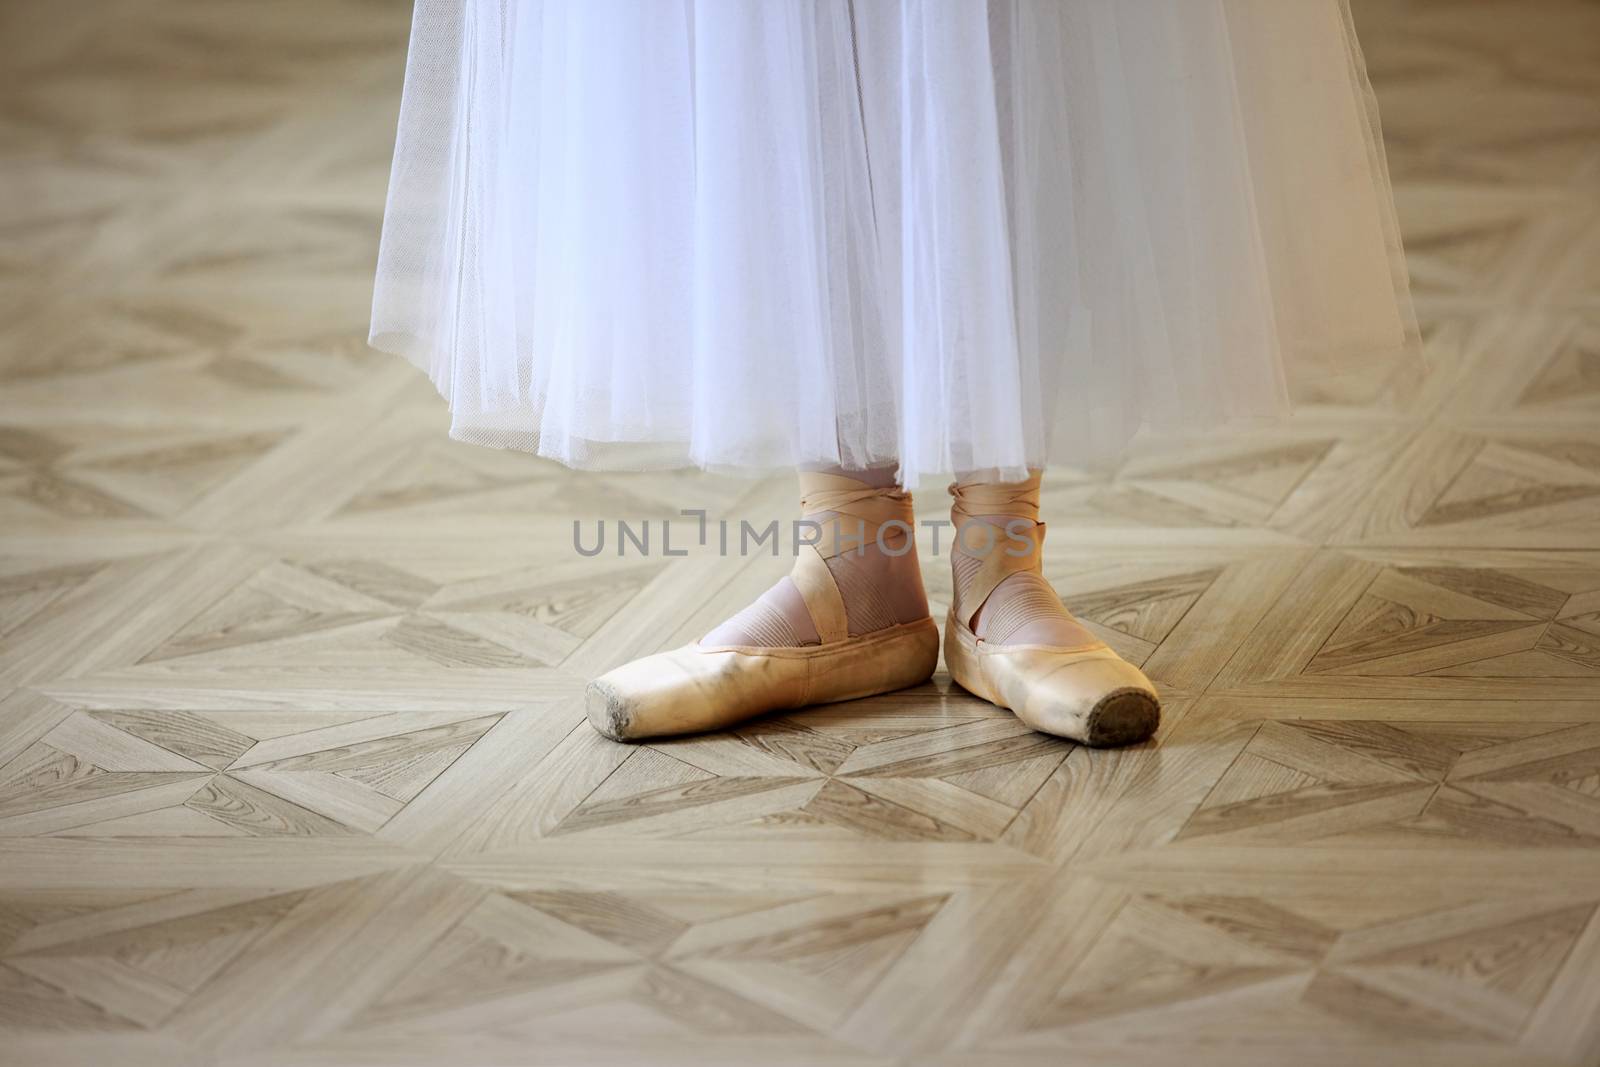 Beautiful legs of the ballerina in pointe shoes